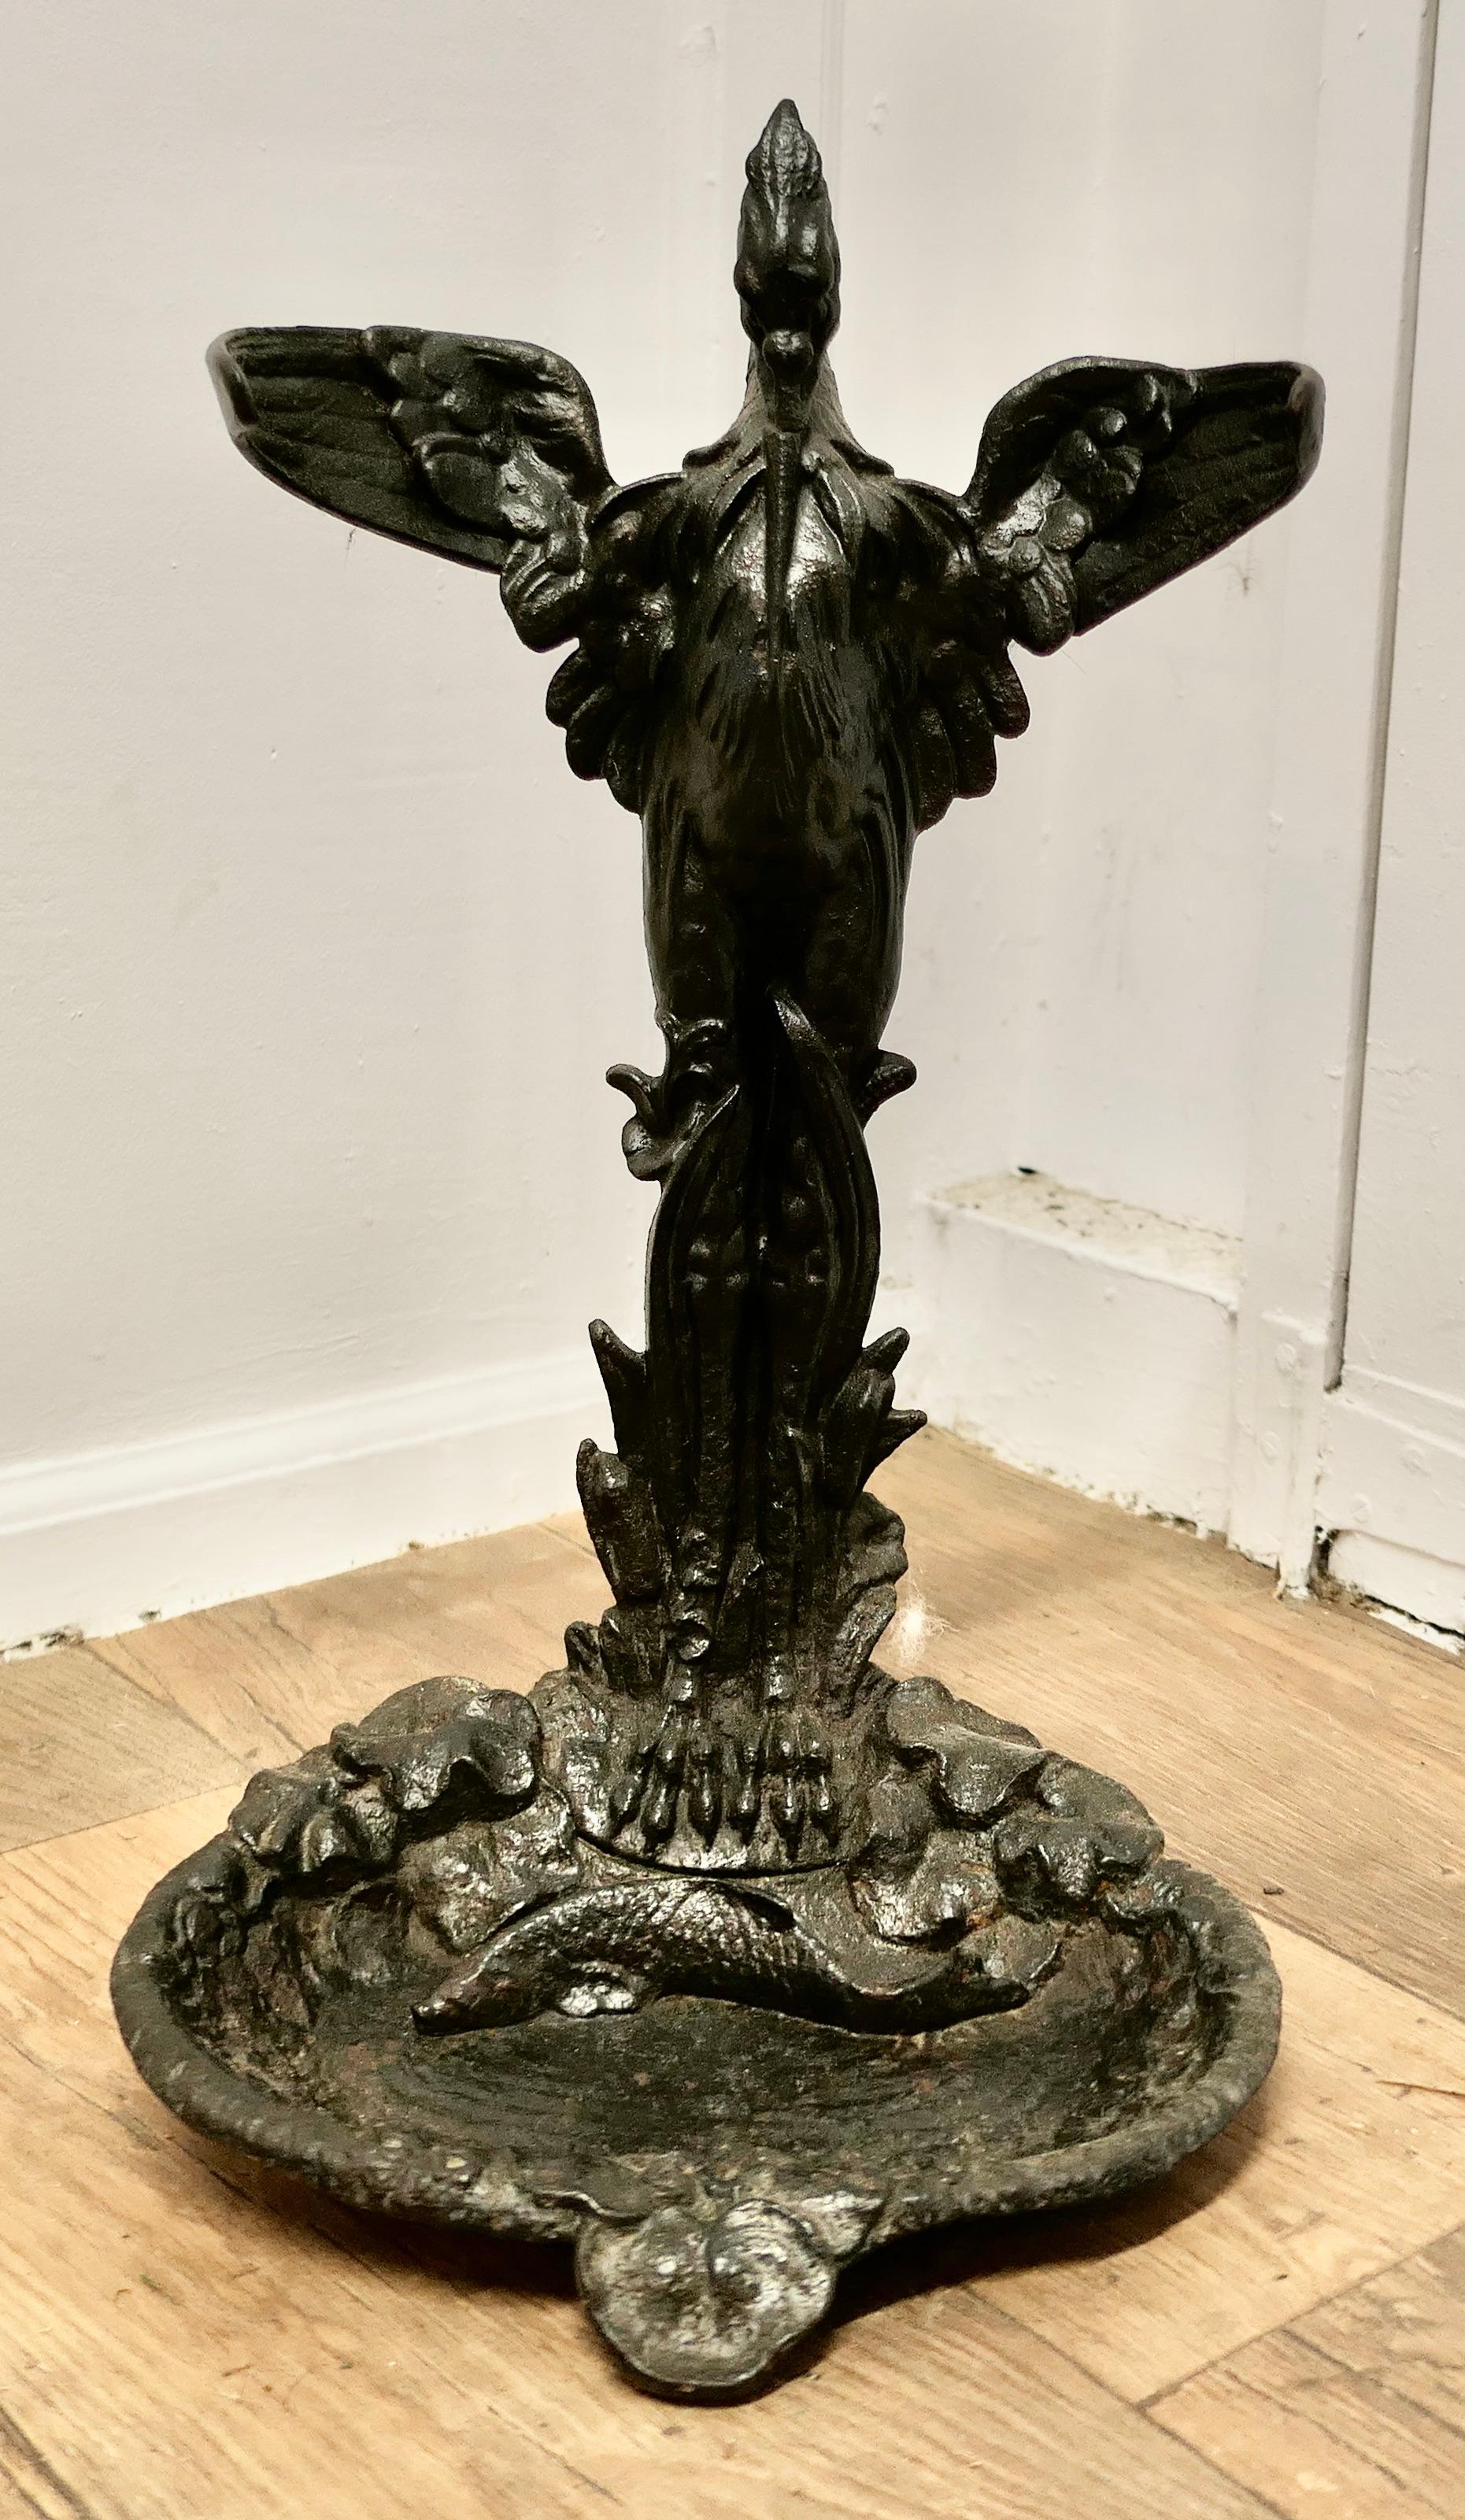 A 19th Century French Cast Iron Umbrella Stand.

19th Century French Cast Iron Umbrella Stand this is a beautifully detailed piece  showing a stork standing over the water watching a fish in the pond below. 
The bird’s outstretched wings curve to